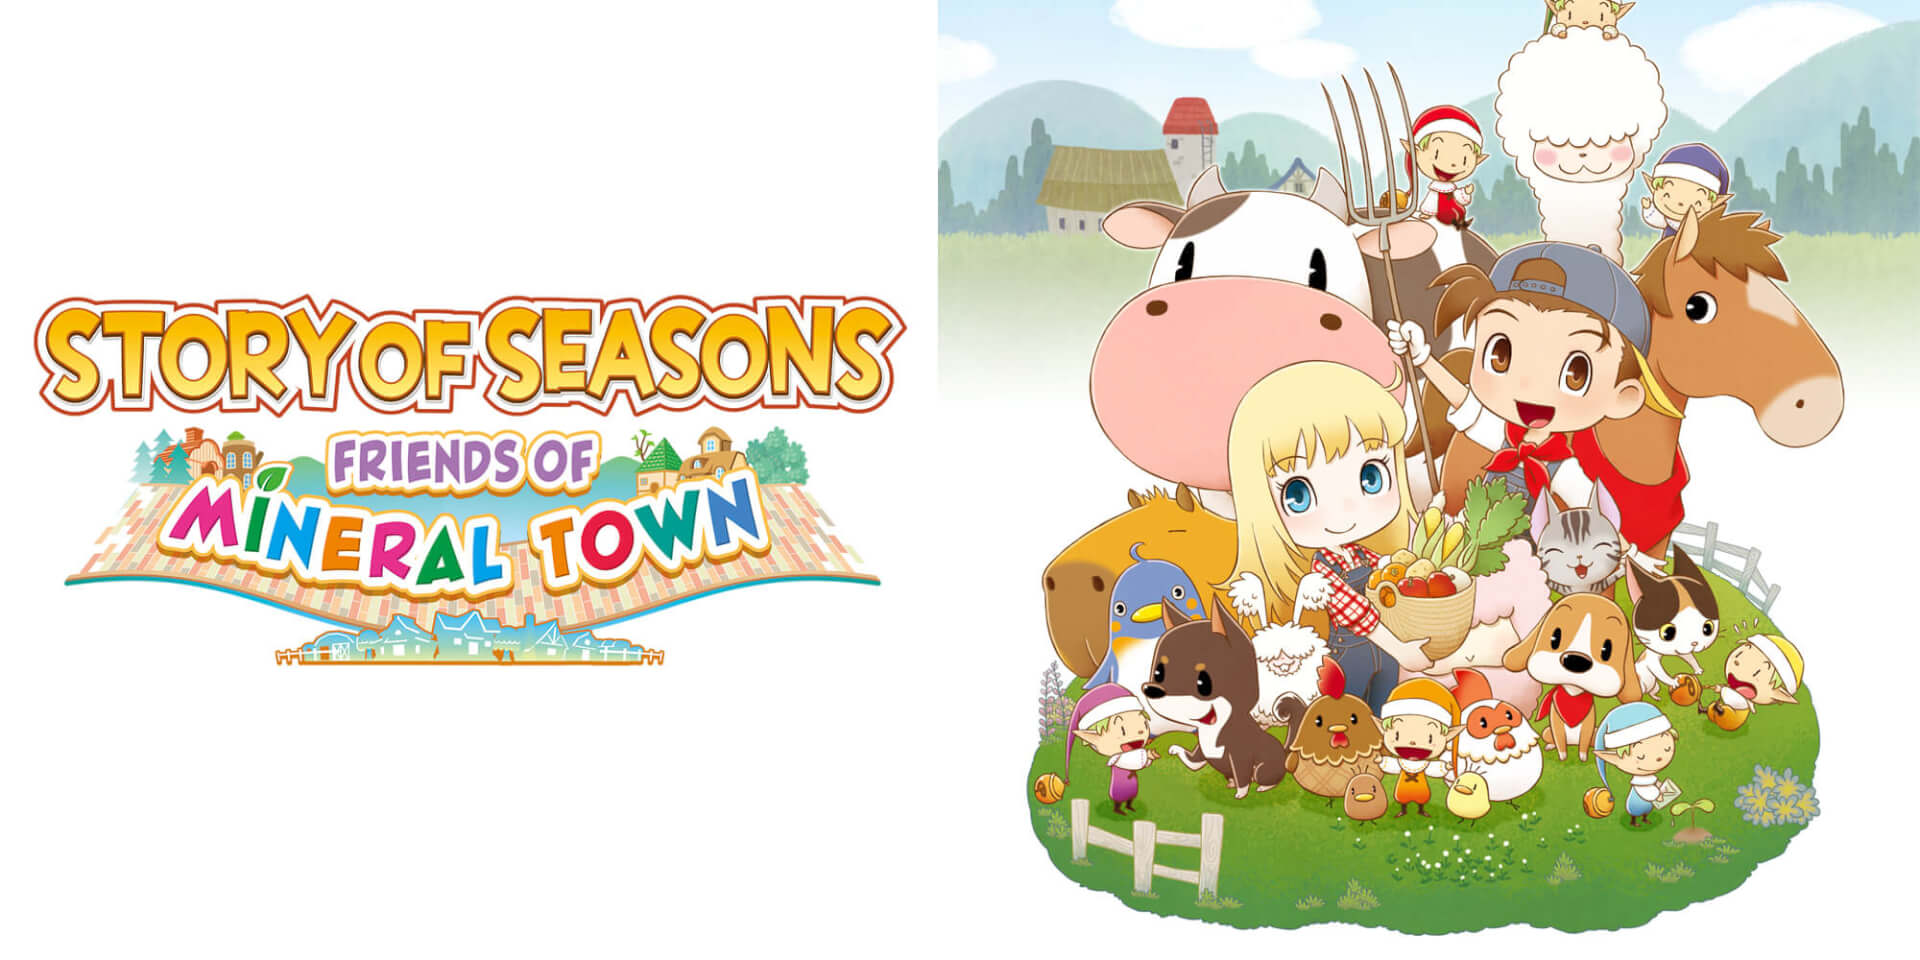 Story of Seasons: Friends of Mineral Town confirmado - Última Ficha